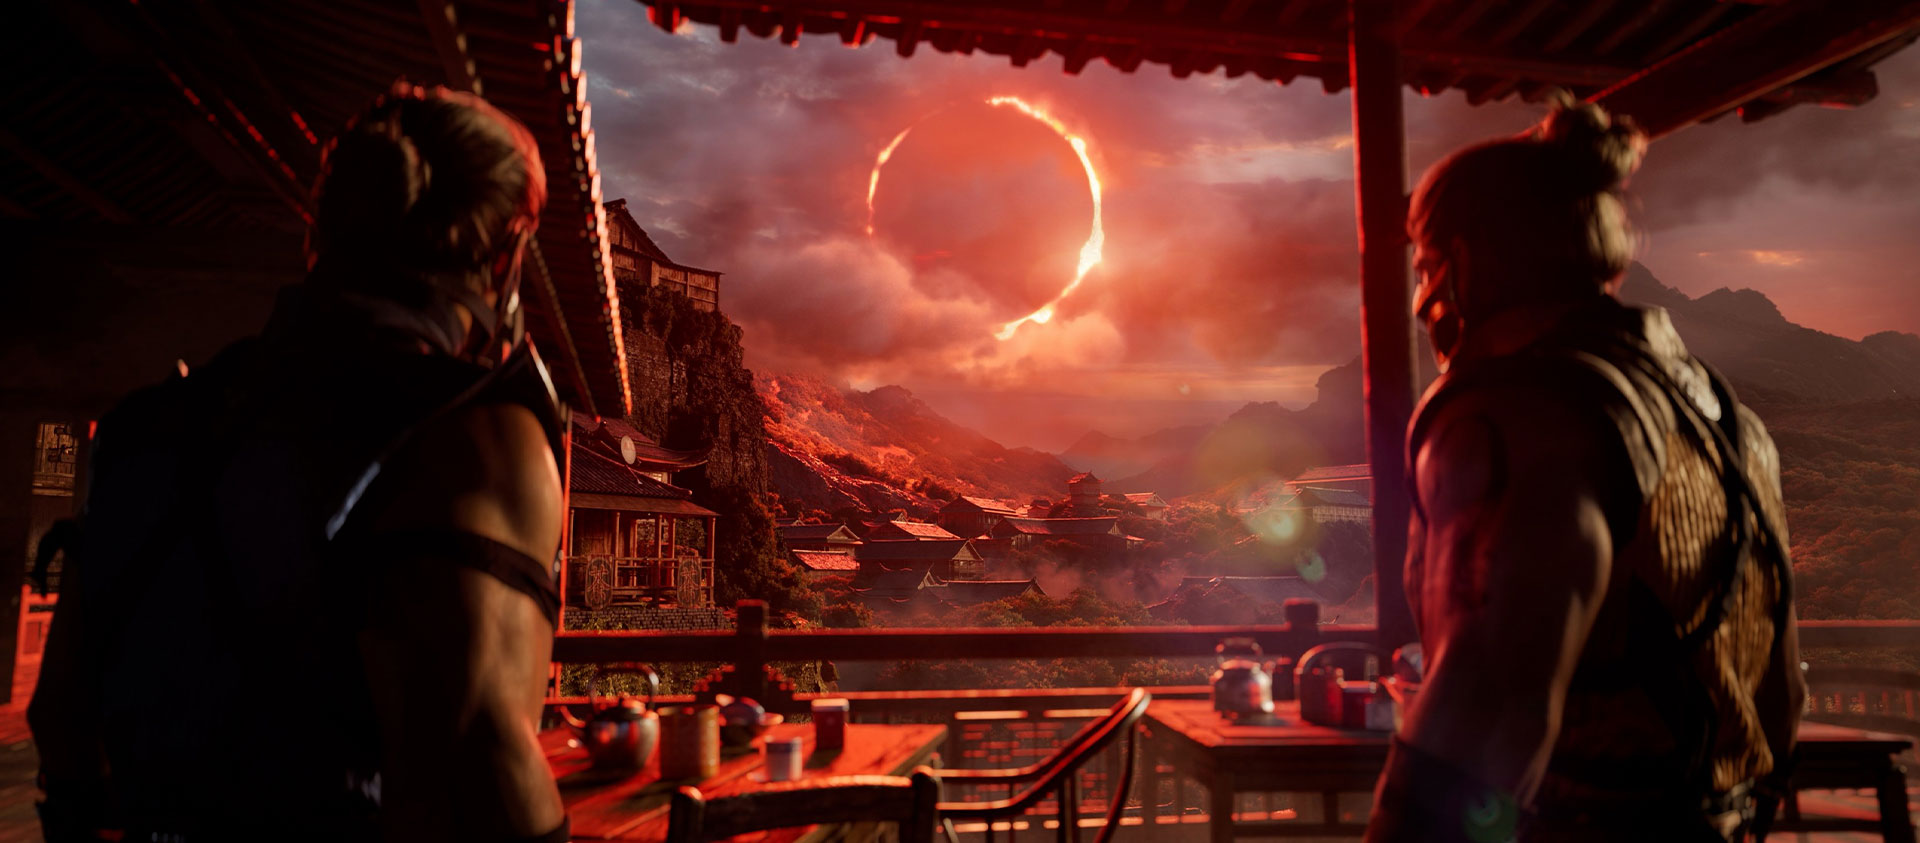 Mortal Kombat 1, two characters under a shed stare at red solar eclipse in the distance